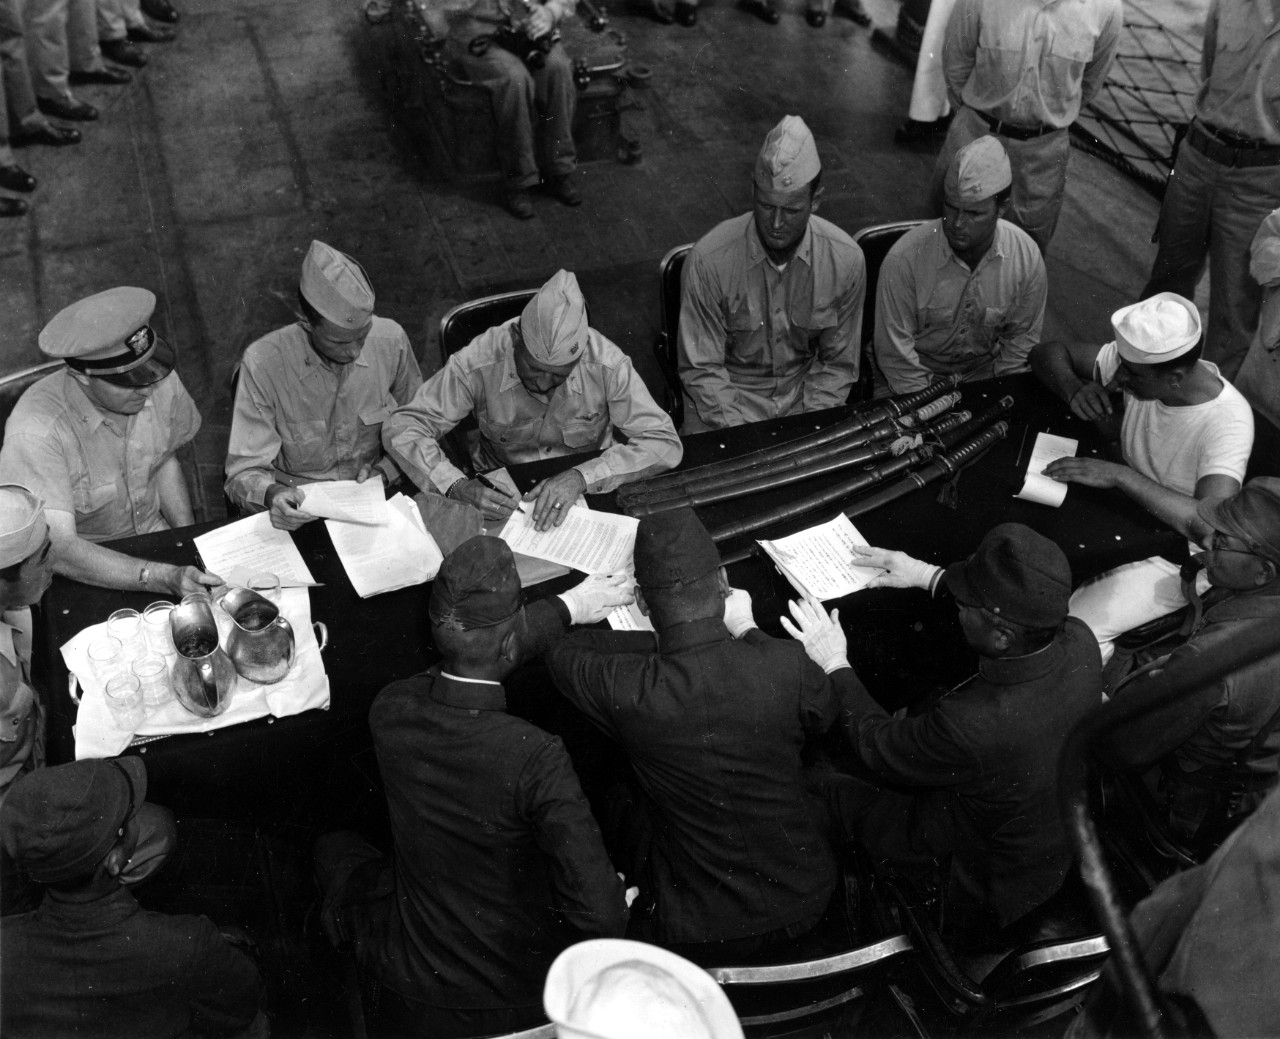 Seated at the table on board Rhind at which the surrender documents for Pagan Island are being signed are (L-R): TSgt. N. Furuiye (U.S. Army interpreter), Cmdr. A. A. Allen, Capt. John C. Hammock, Como Vernon F. Grant, Cmdr. George T. Baker, Lt. ...